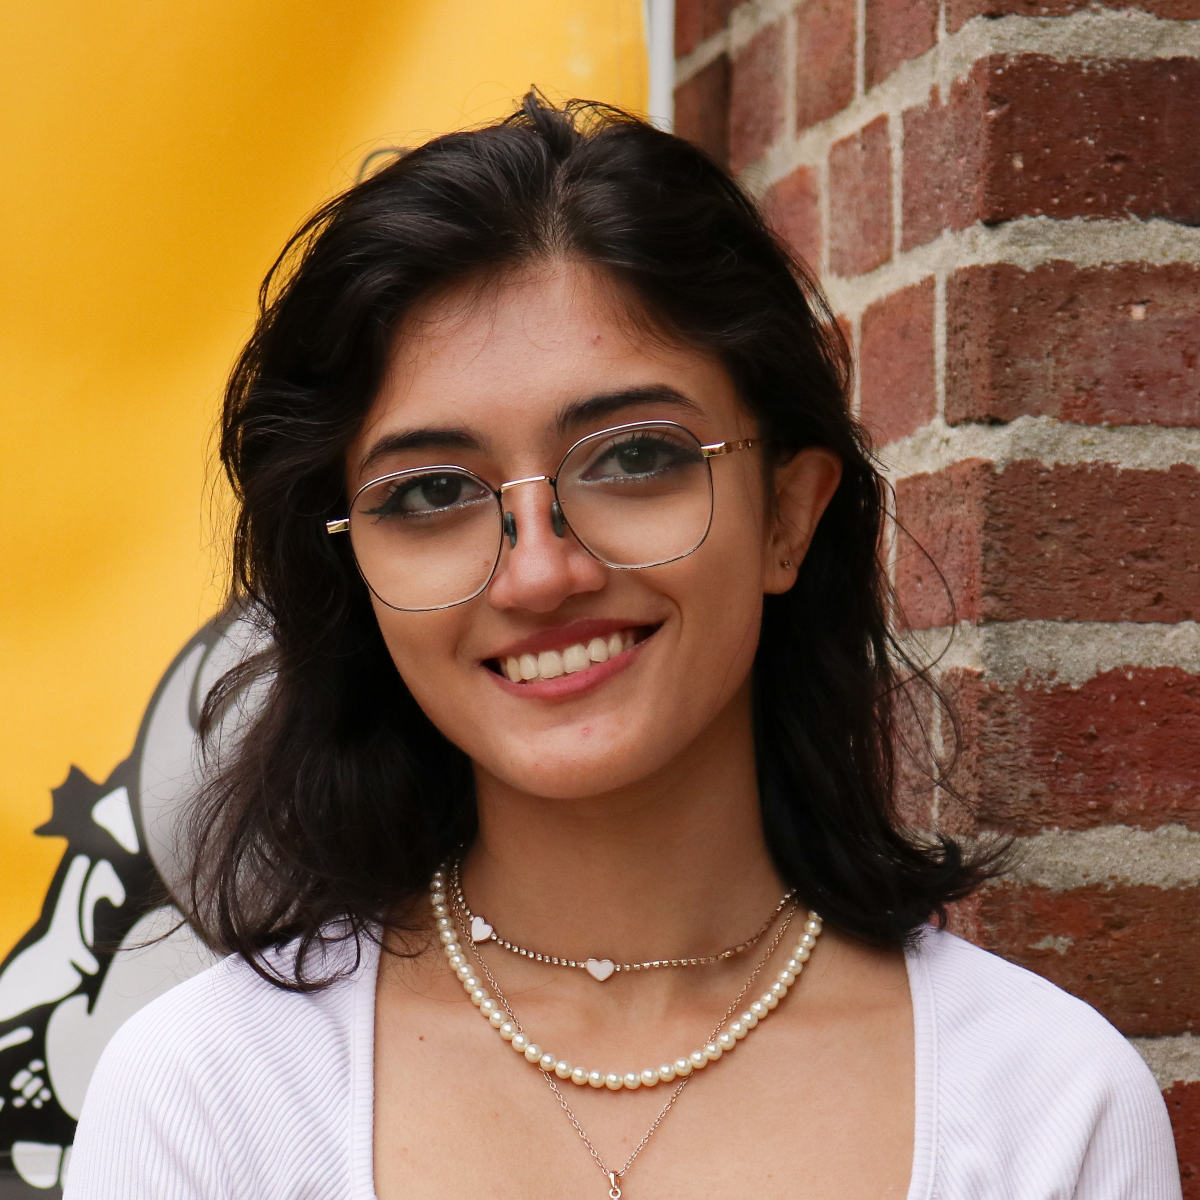 Nandani Singh smiles outdoors on campus, a brick building in the background with a banner featuring an illustration of Joe Vandal.